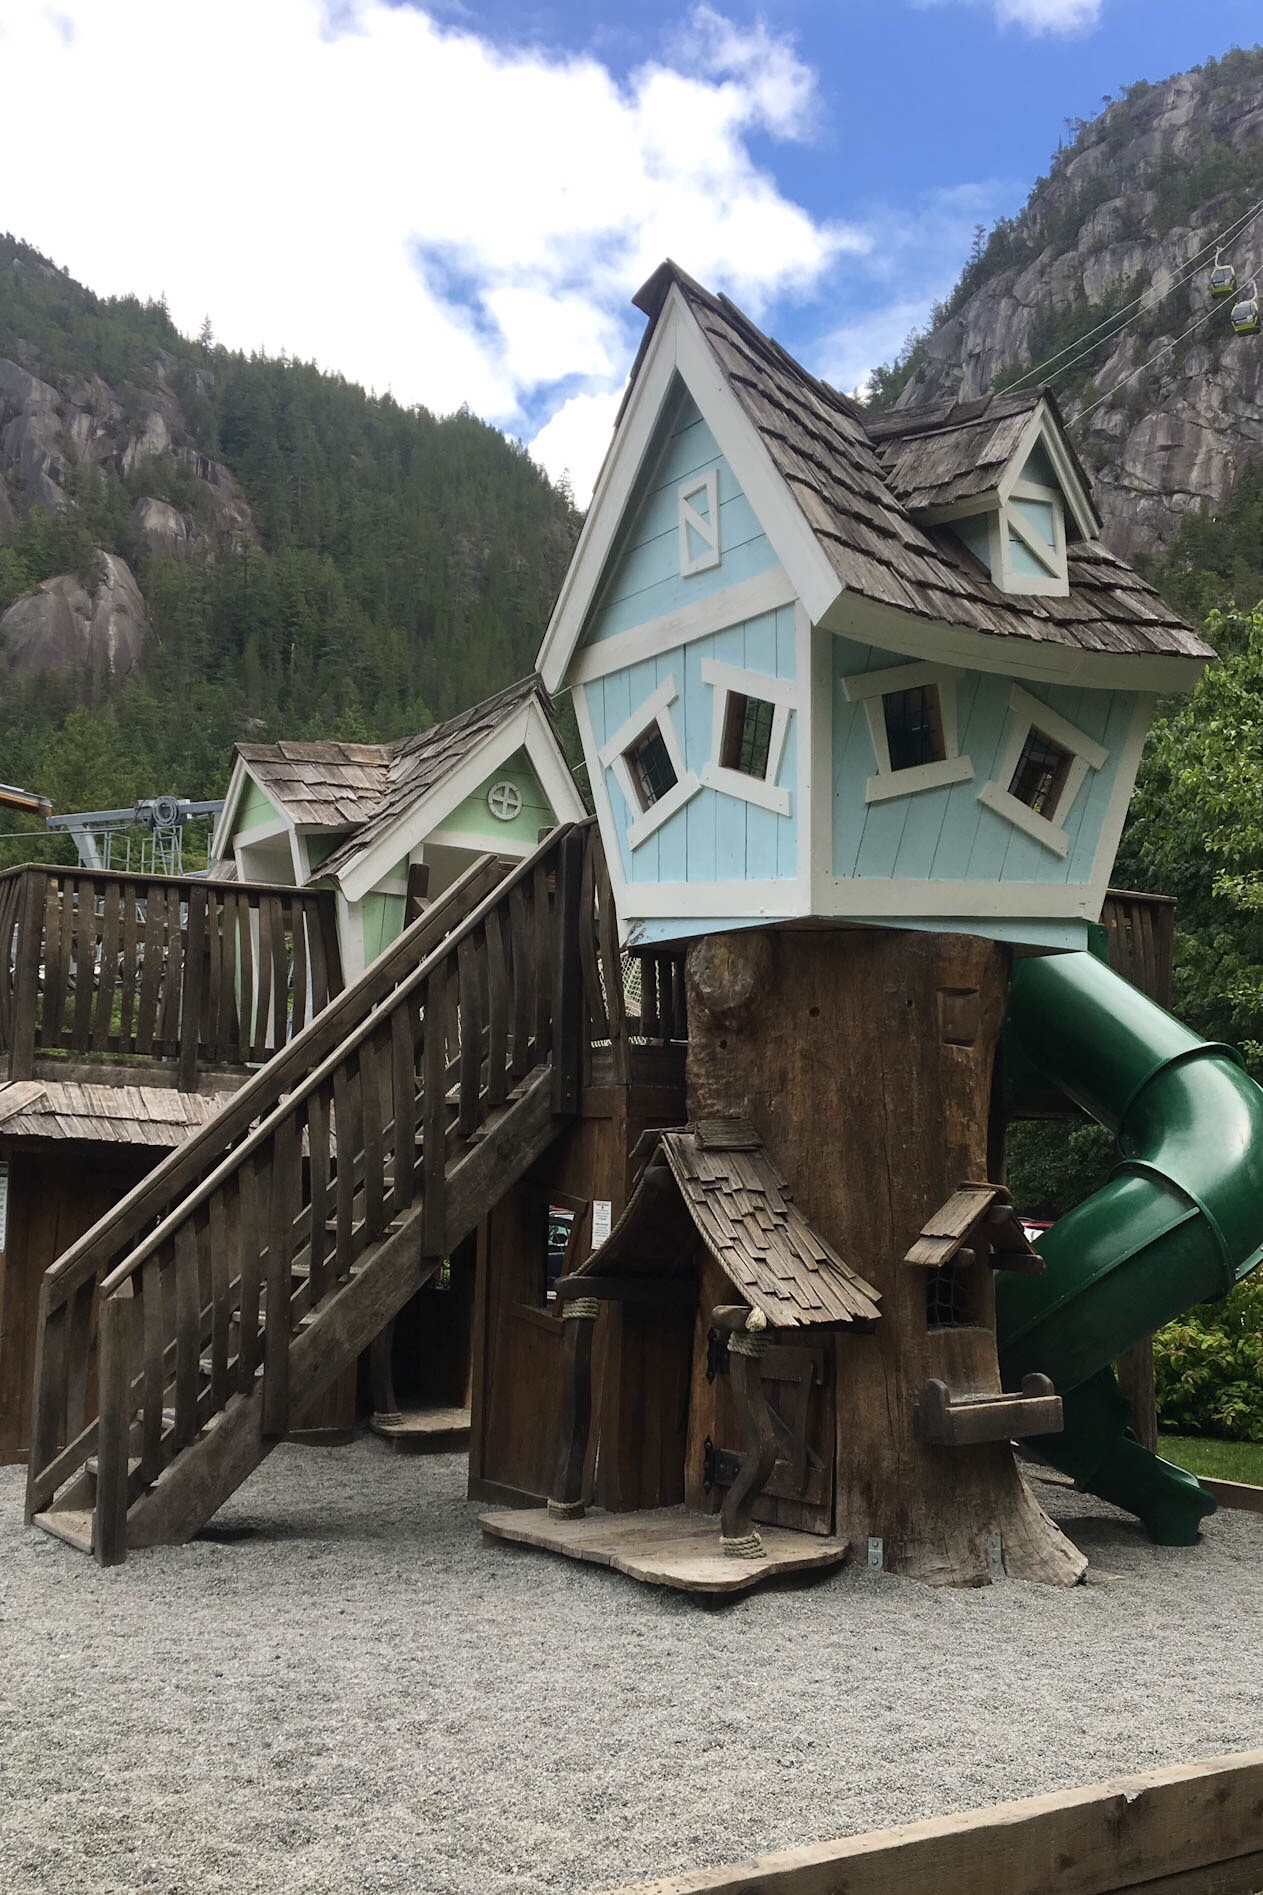 There is so much attention to derail with this house. It is adorable and also looks really fun to play on!